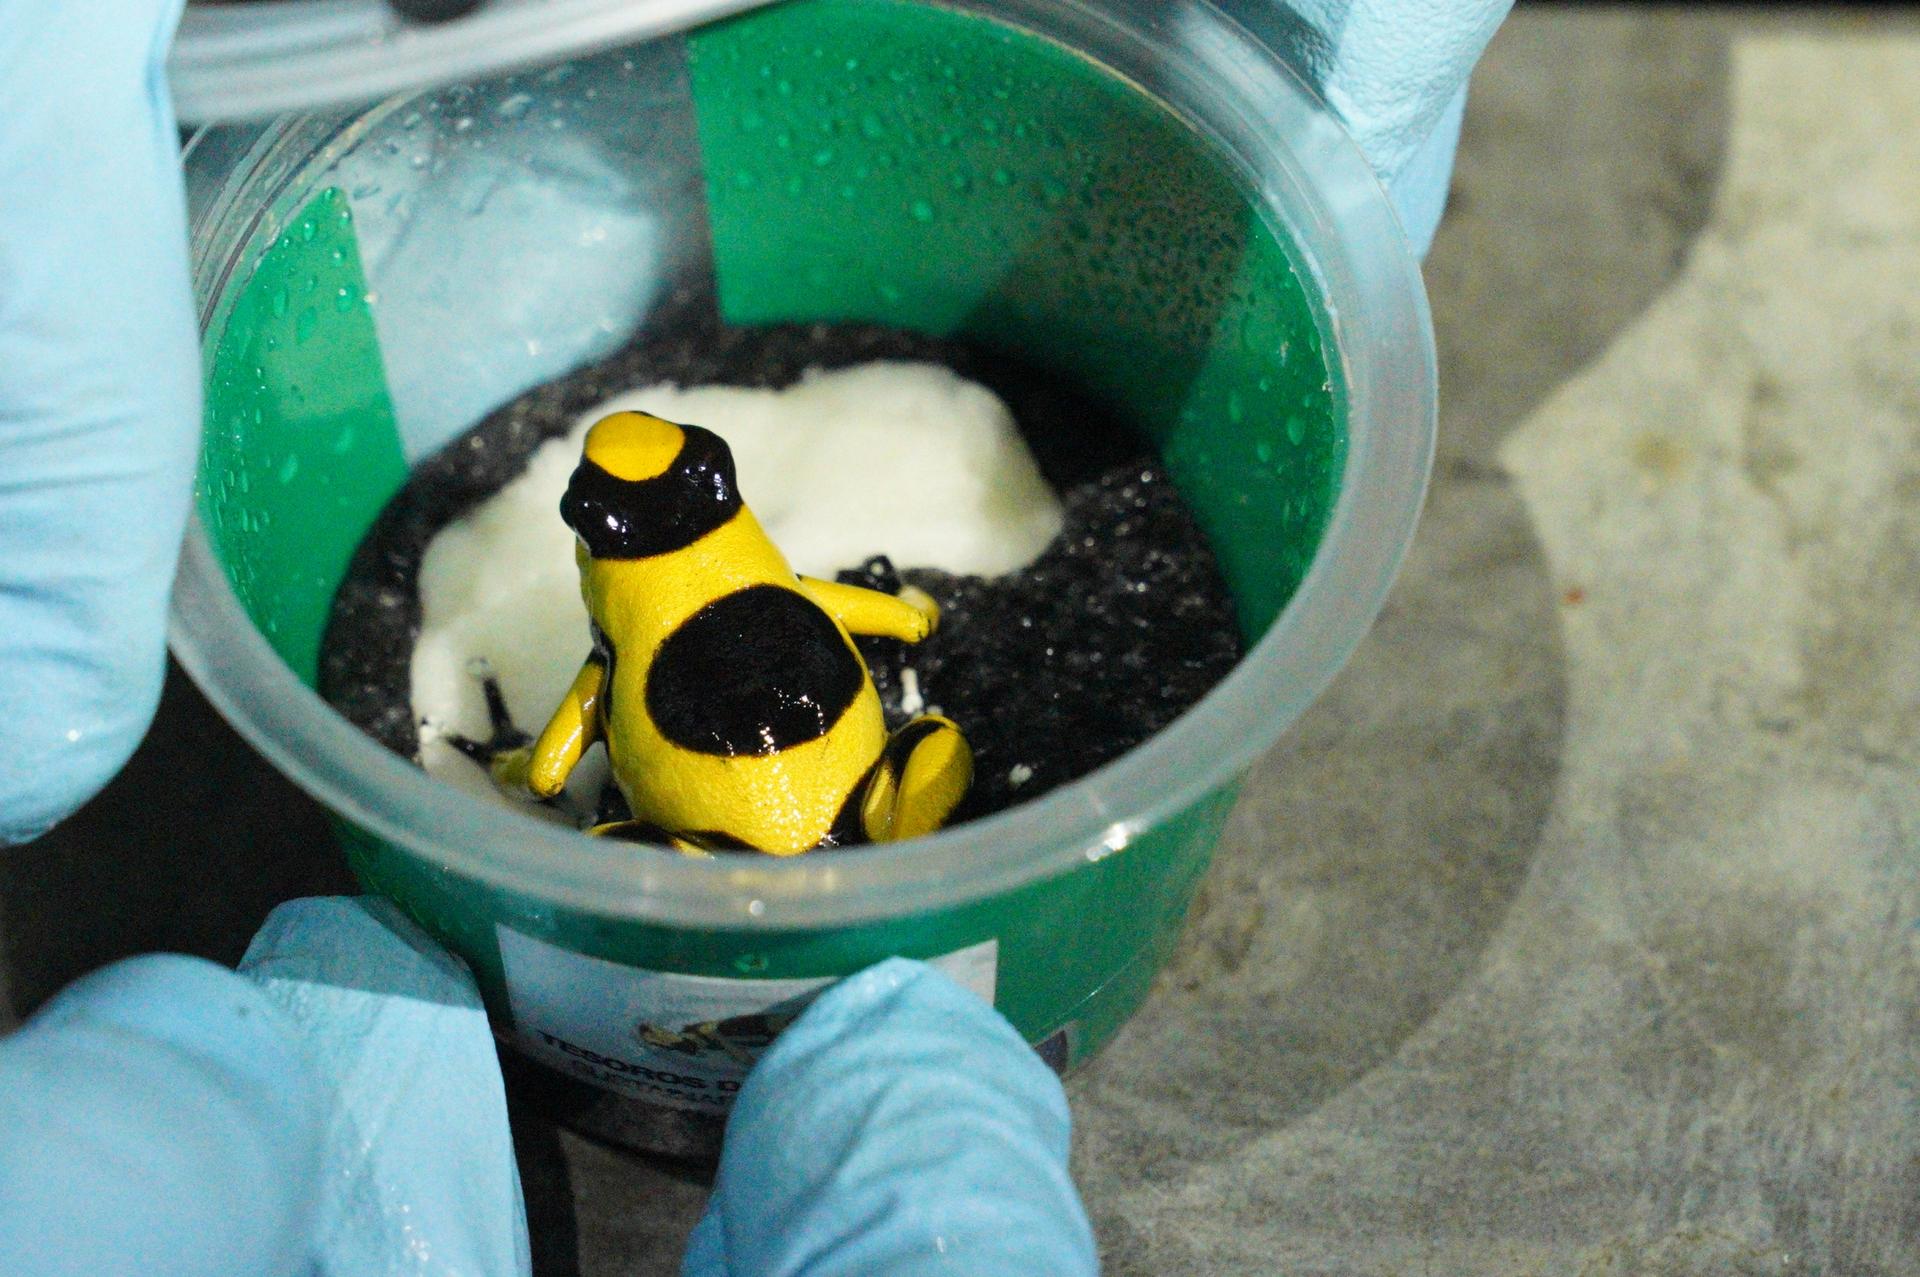 A yellow frog with black dots in a plastic cup